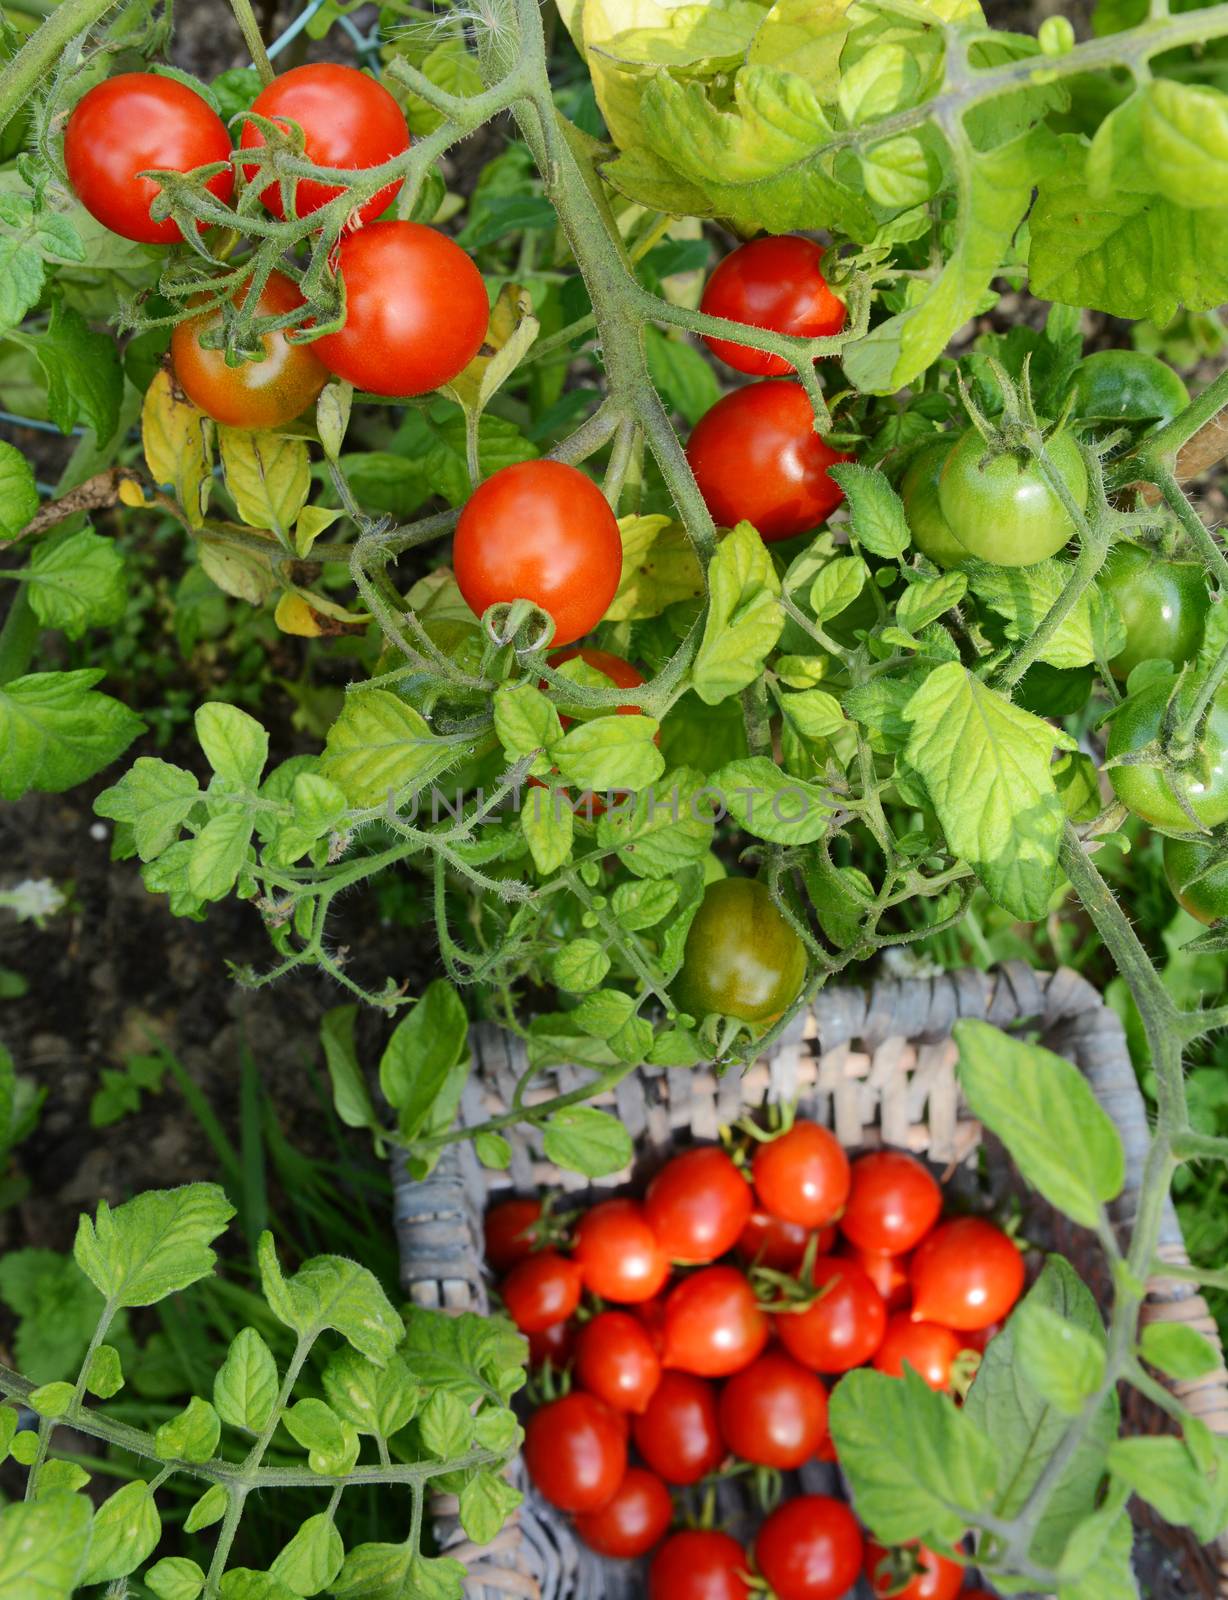 Plump red tomatoes on the vine, above a basket full of harvested tomatoes below